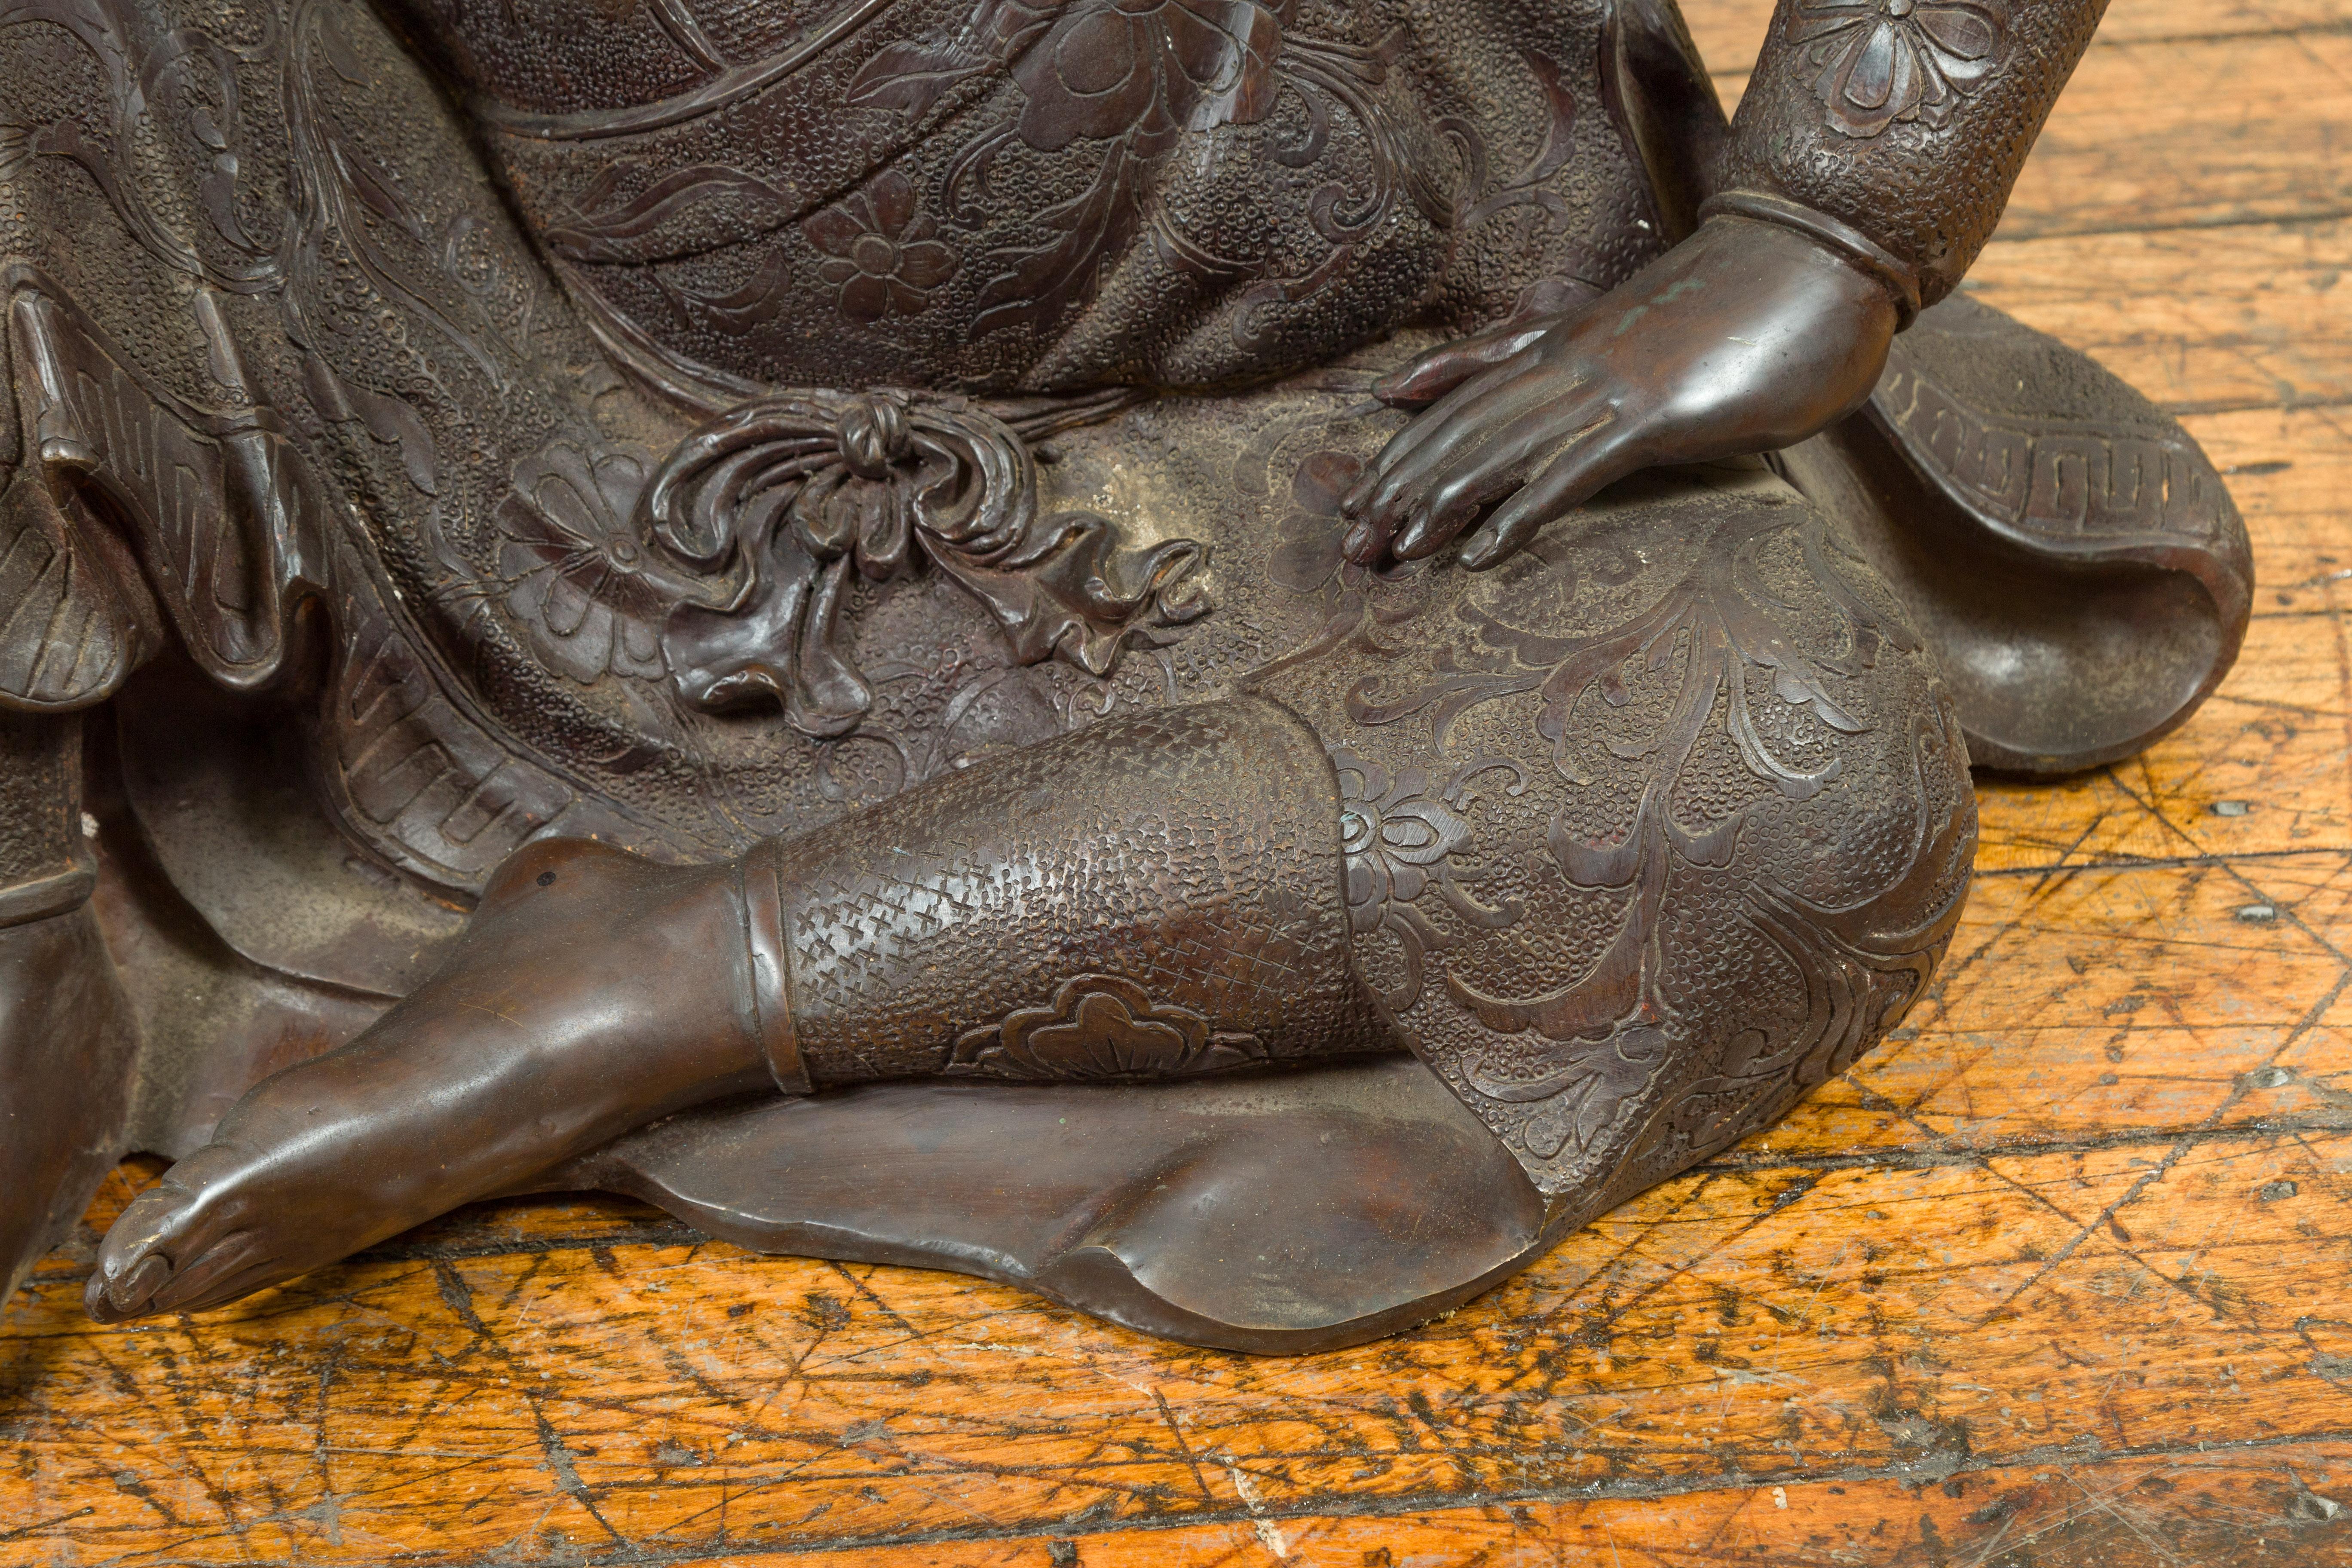 Japanese Style Bronze Sculpture of a Seated Woman Holding a Mythical Creature 1